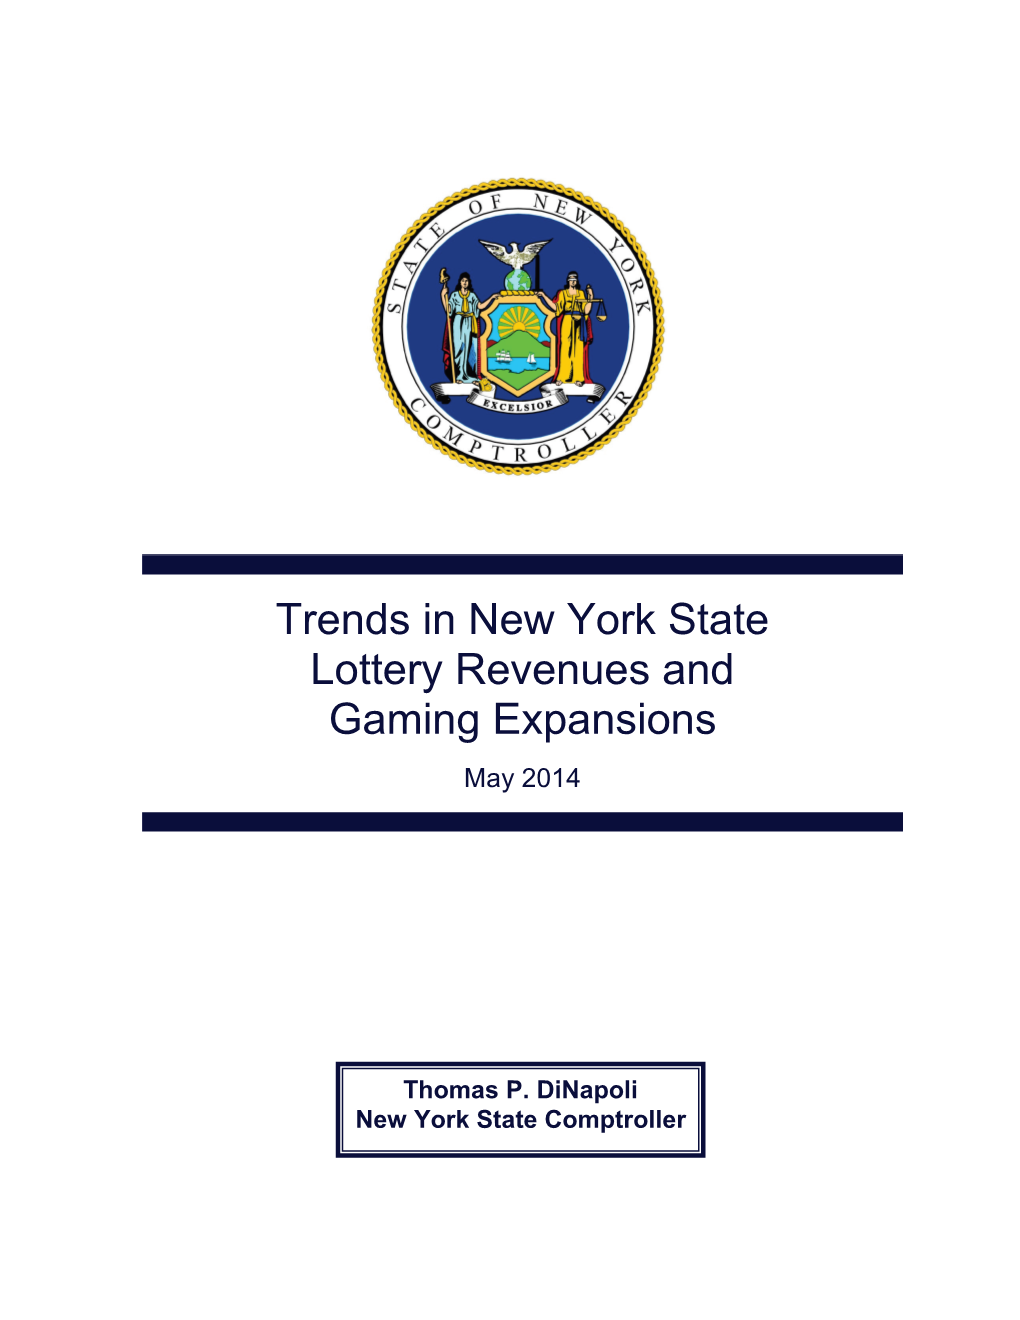 Trends in New York State Lottery Revenues and Gaming Expansions